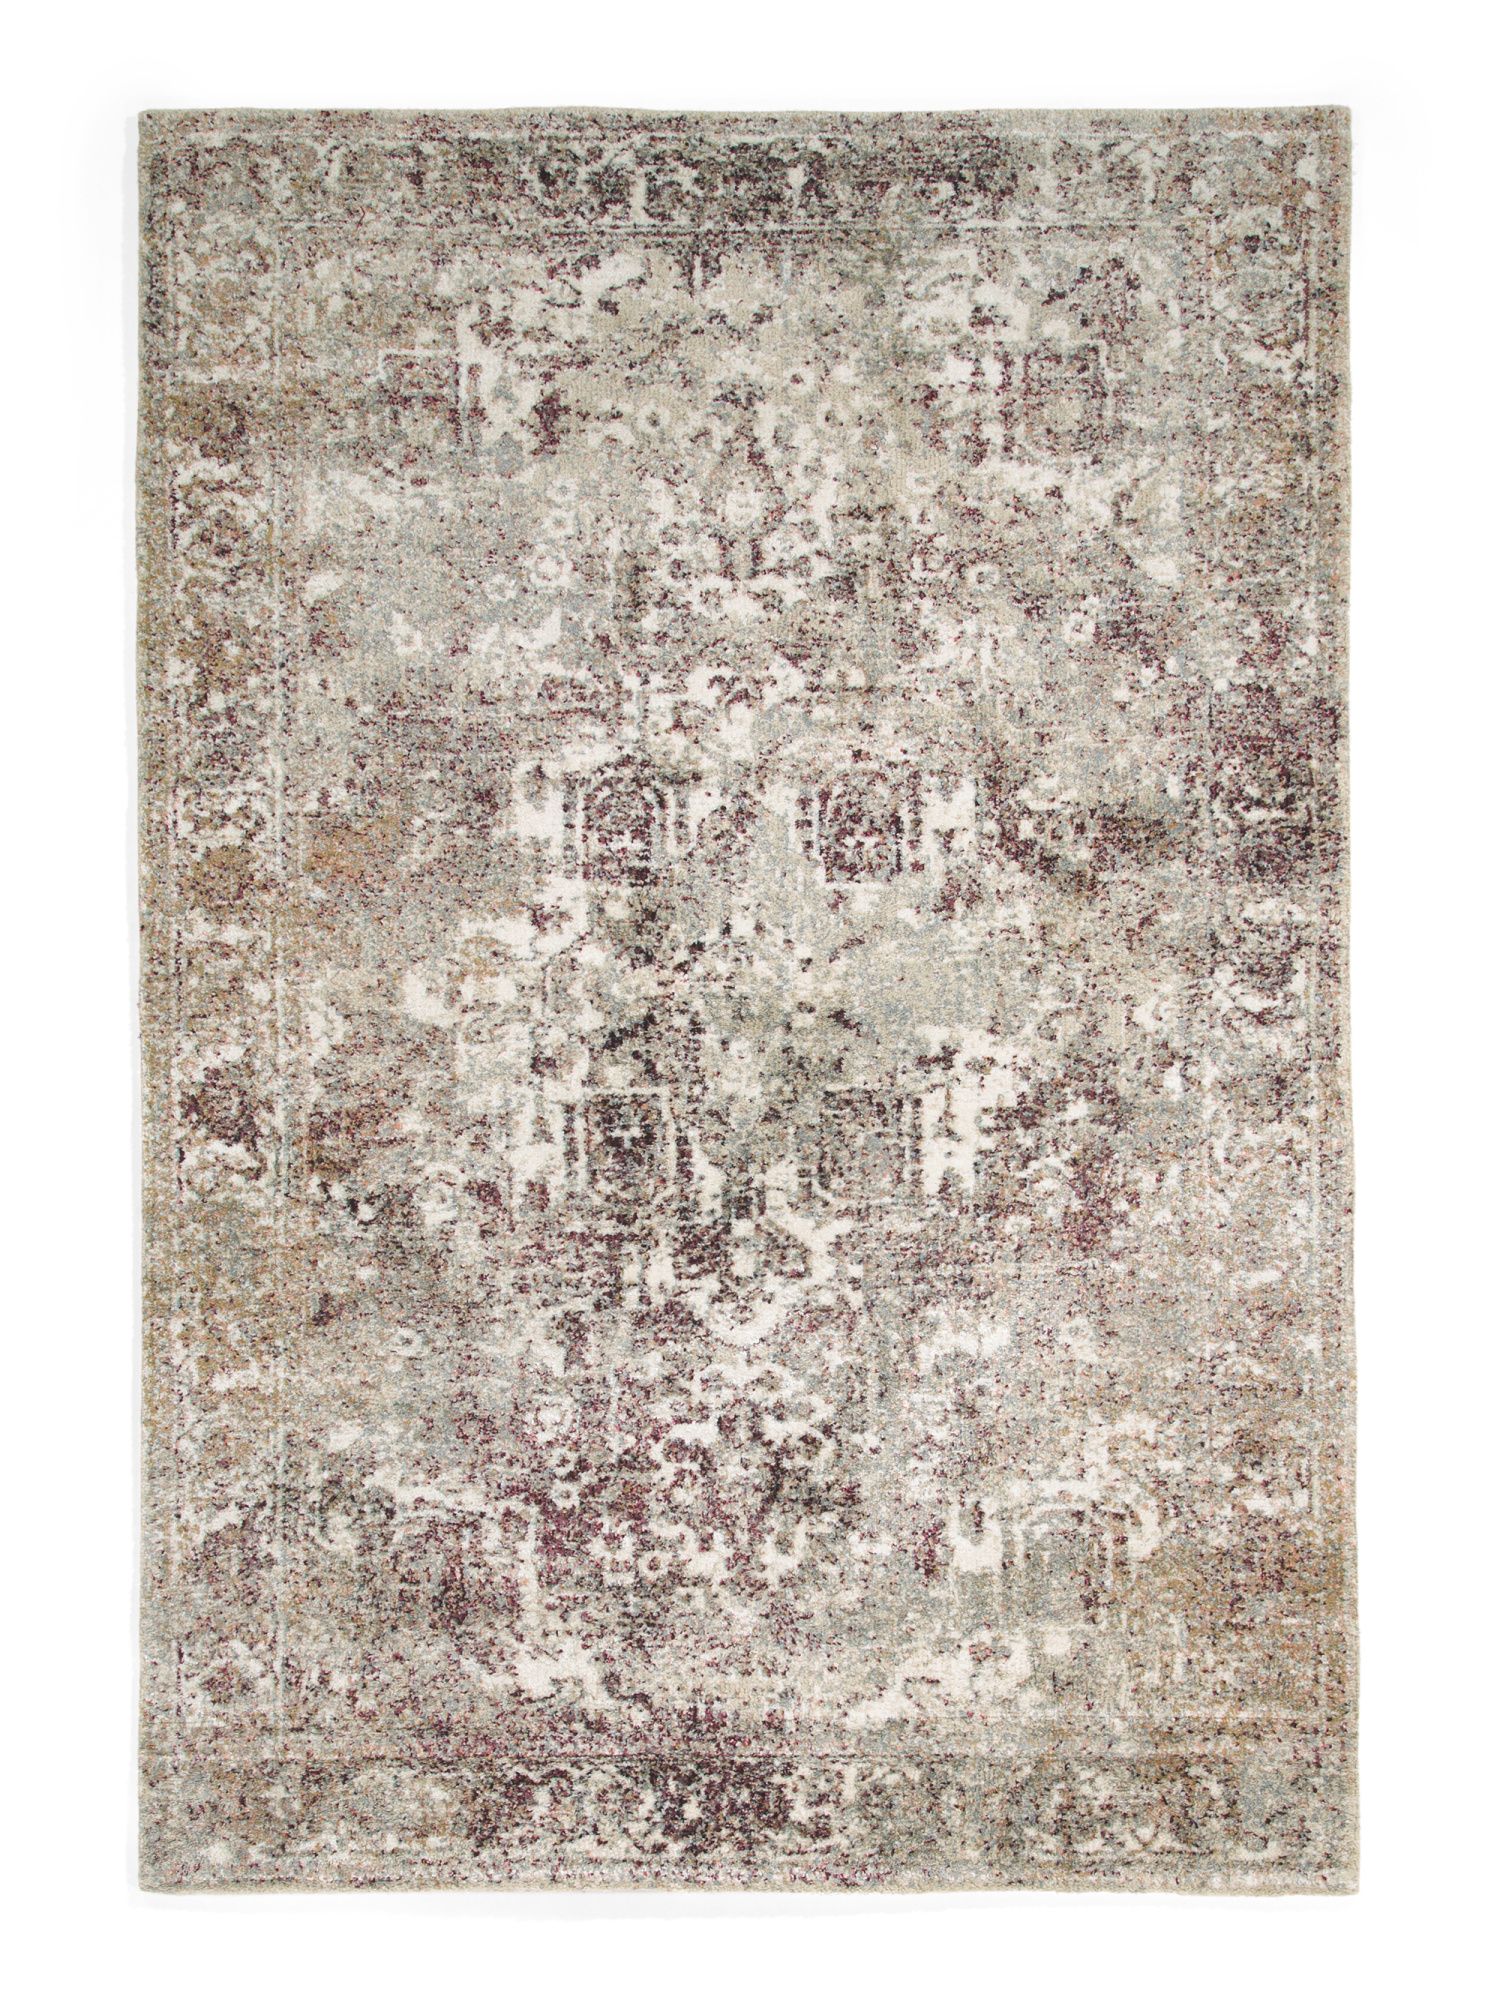 Made In Egypt Transitional Area Rug | TJ Maxx